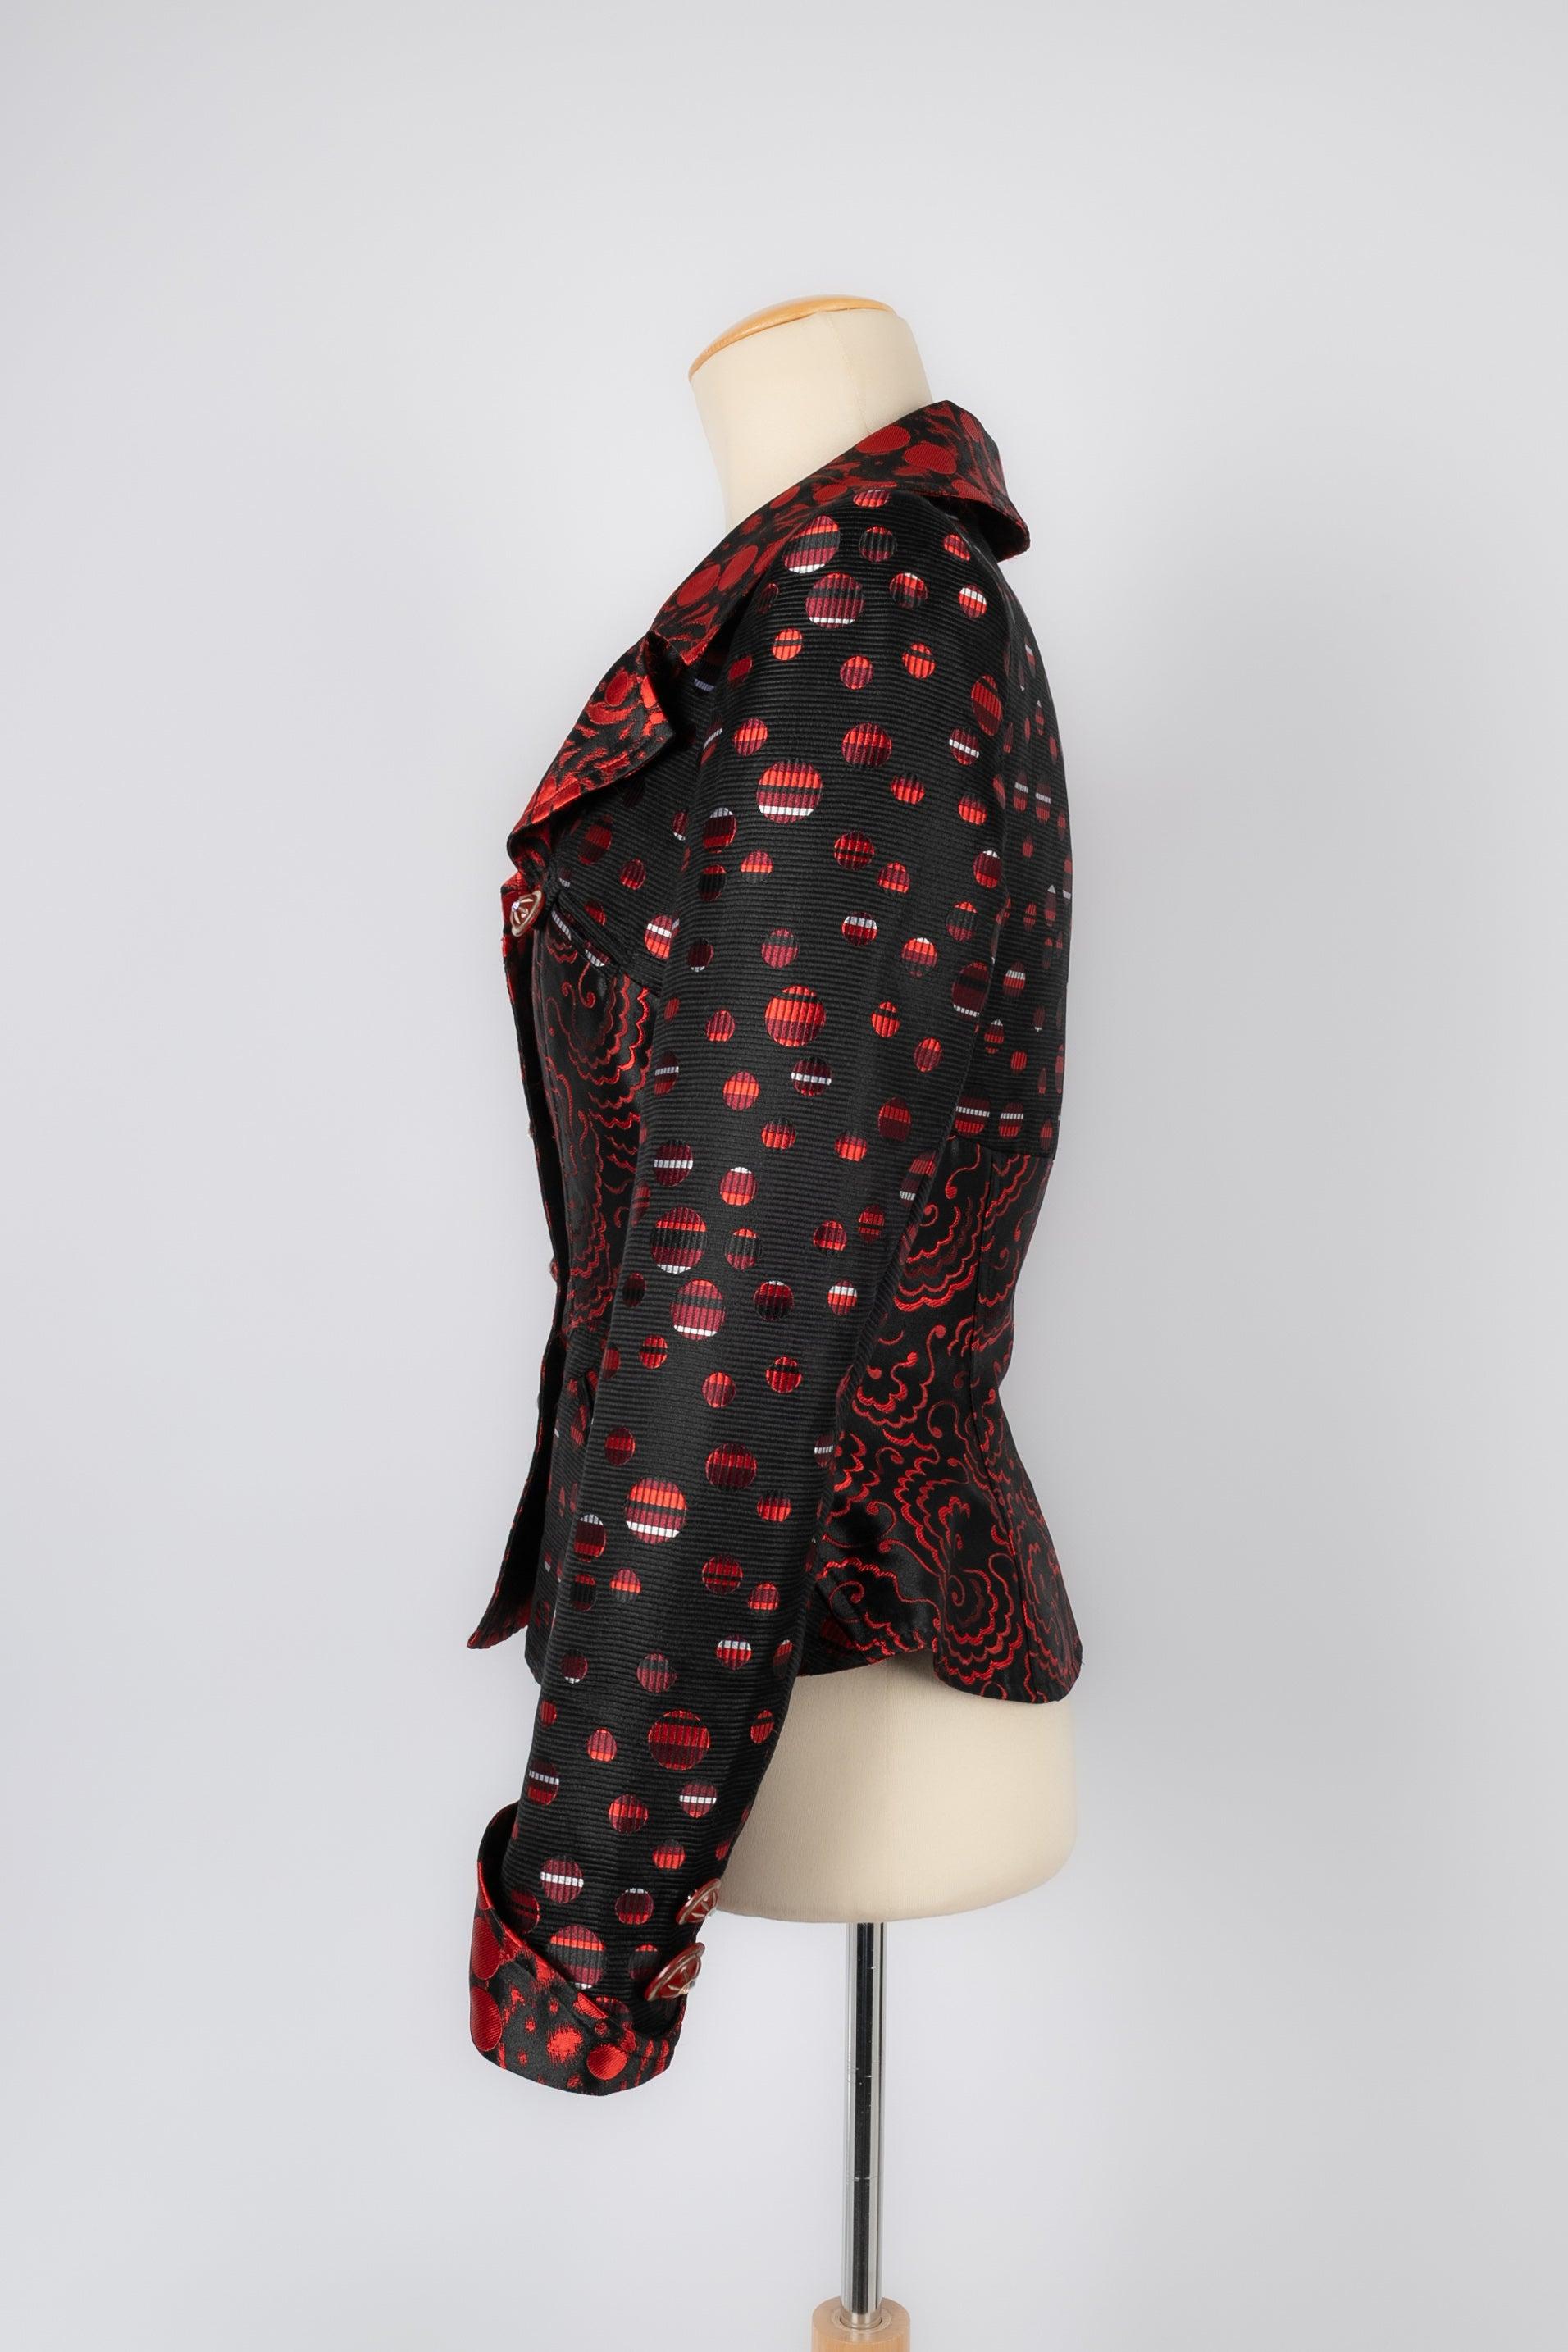 Christian Lacroix - (Made in France) Black and red tones jacket. Silk lining. No size nor composition label, it fits a 36FR/38FR. To be mentioned, very slitght ring stains on the silk lining.

Additional information:
Condition: Good